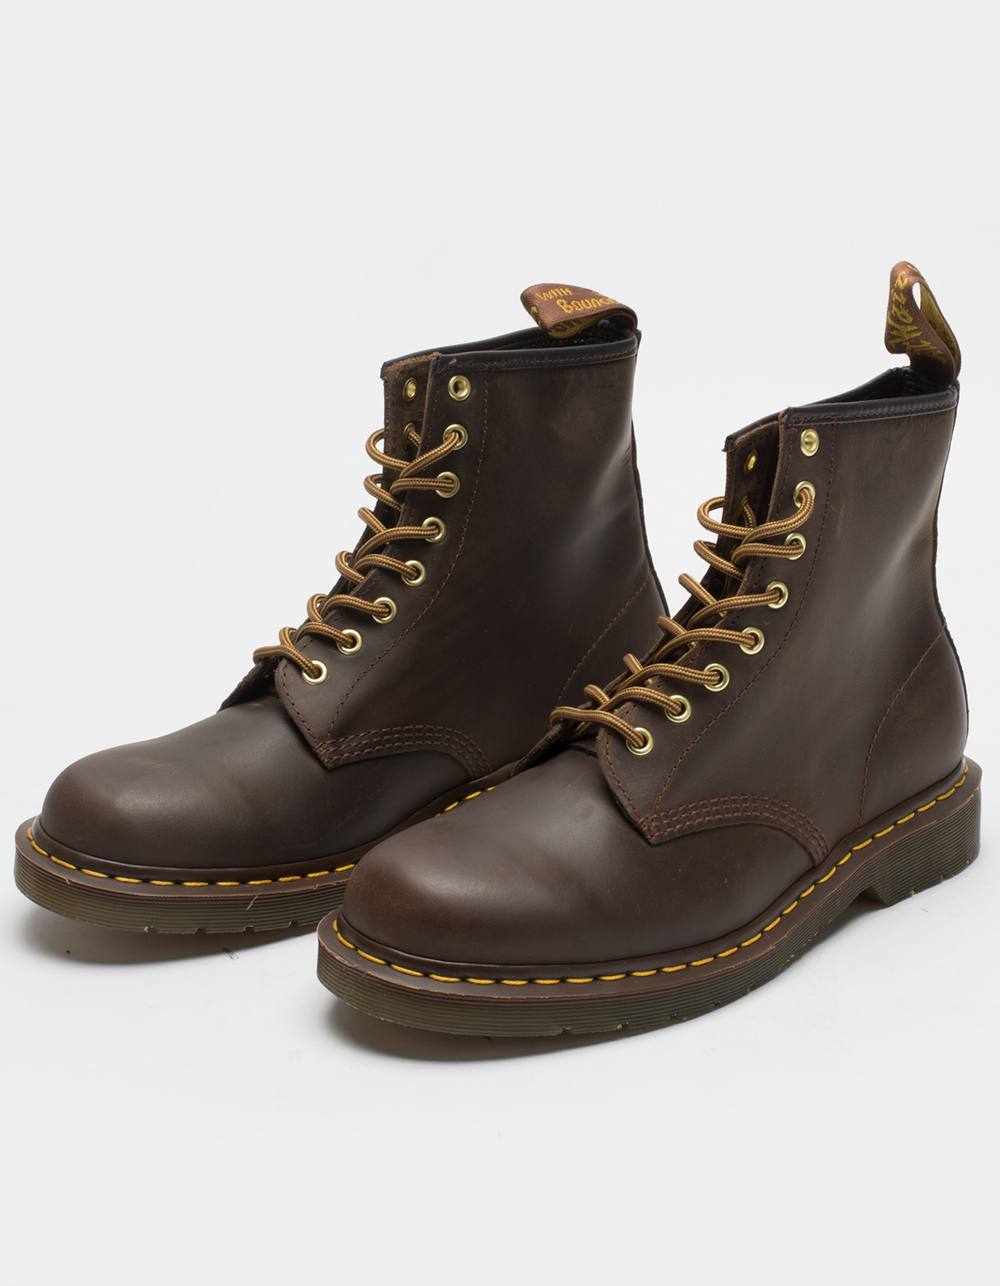 DR MARTENS 1460 Crazy Horse Leather Lace Up Mens Boots - BROWN